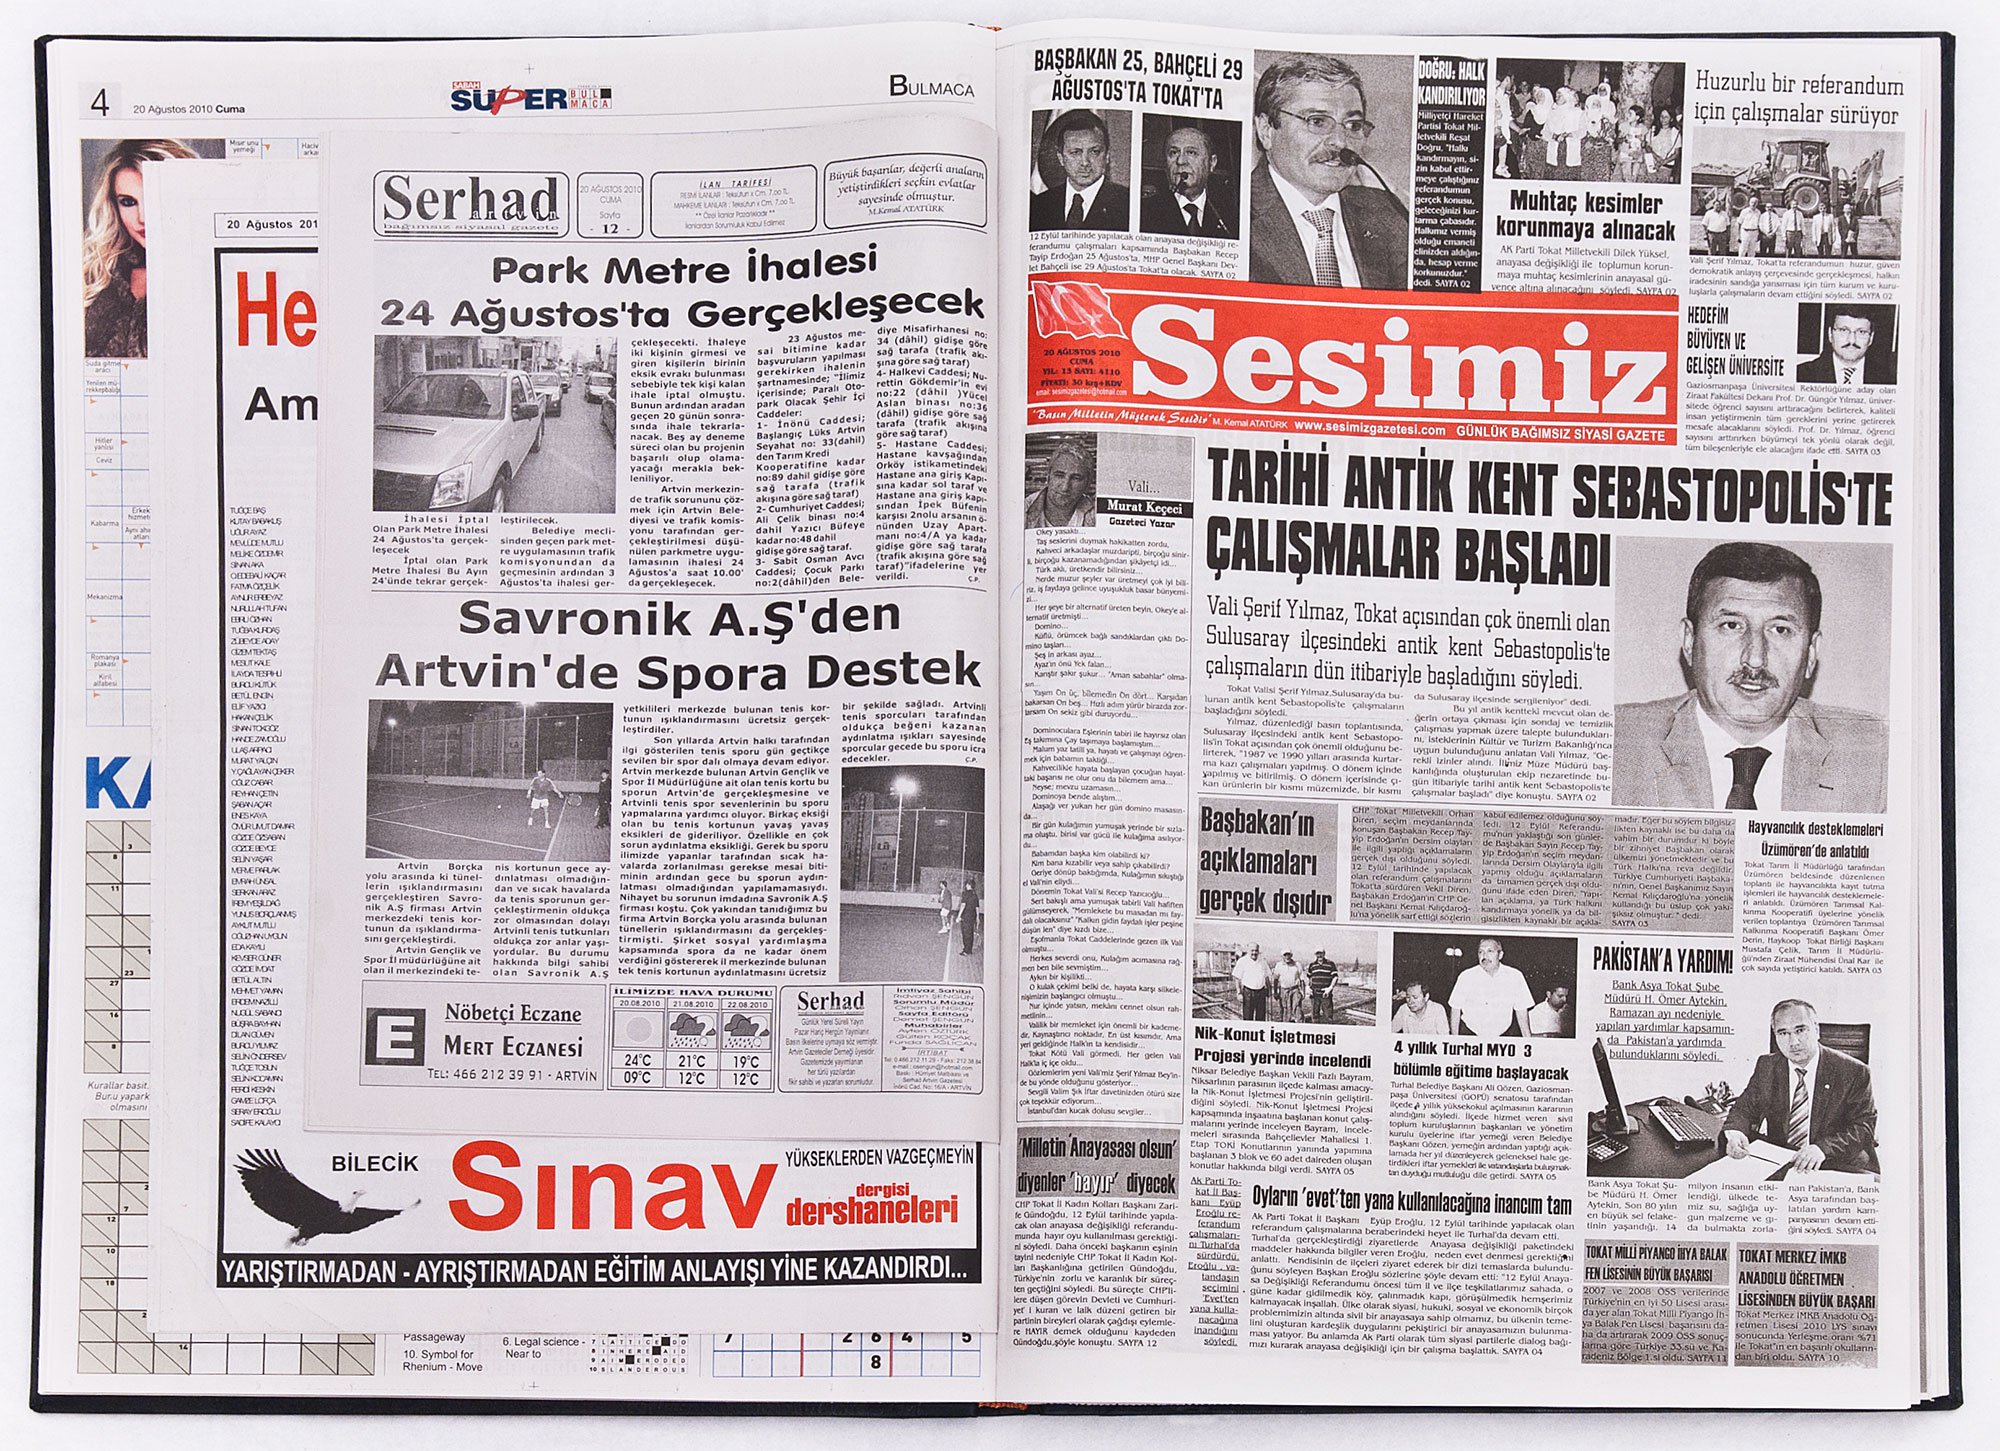 Banu Cennetoğlu, 20.08.2010, an extended collection of newspapers printed in Turkey on one particular day (20.08.2010), printed matter bound in hardcover in seven volumes in alphabetical order, 2010. Installation view, SAMPLE SALE / 2010 BC, Rodeo, Istanbul, 2010